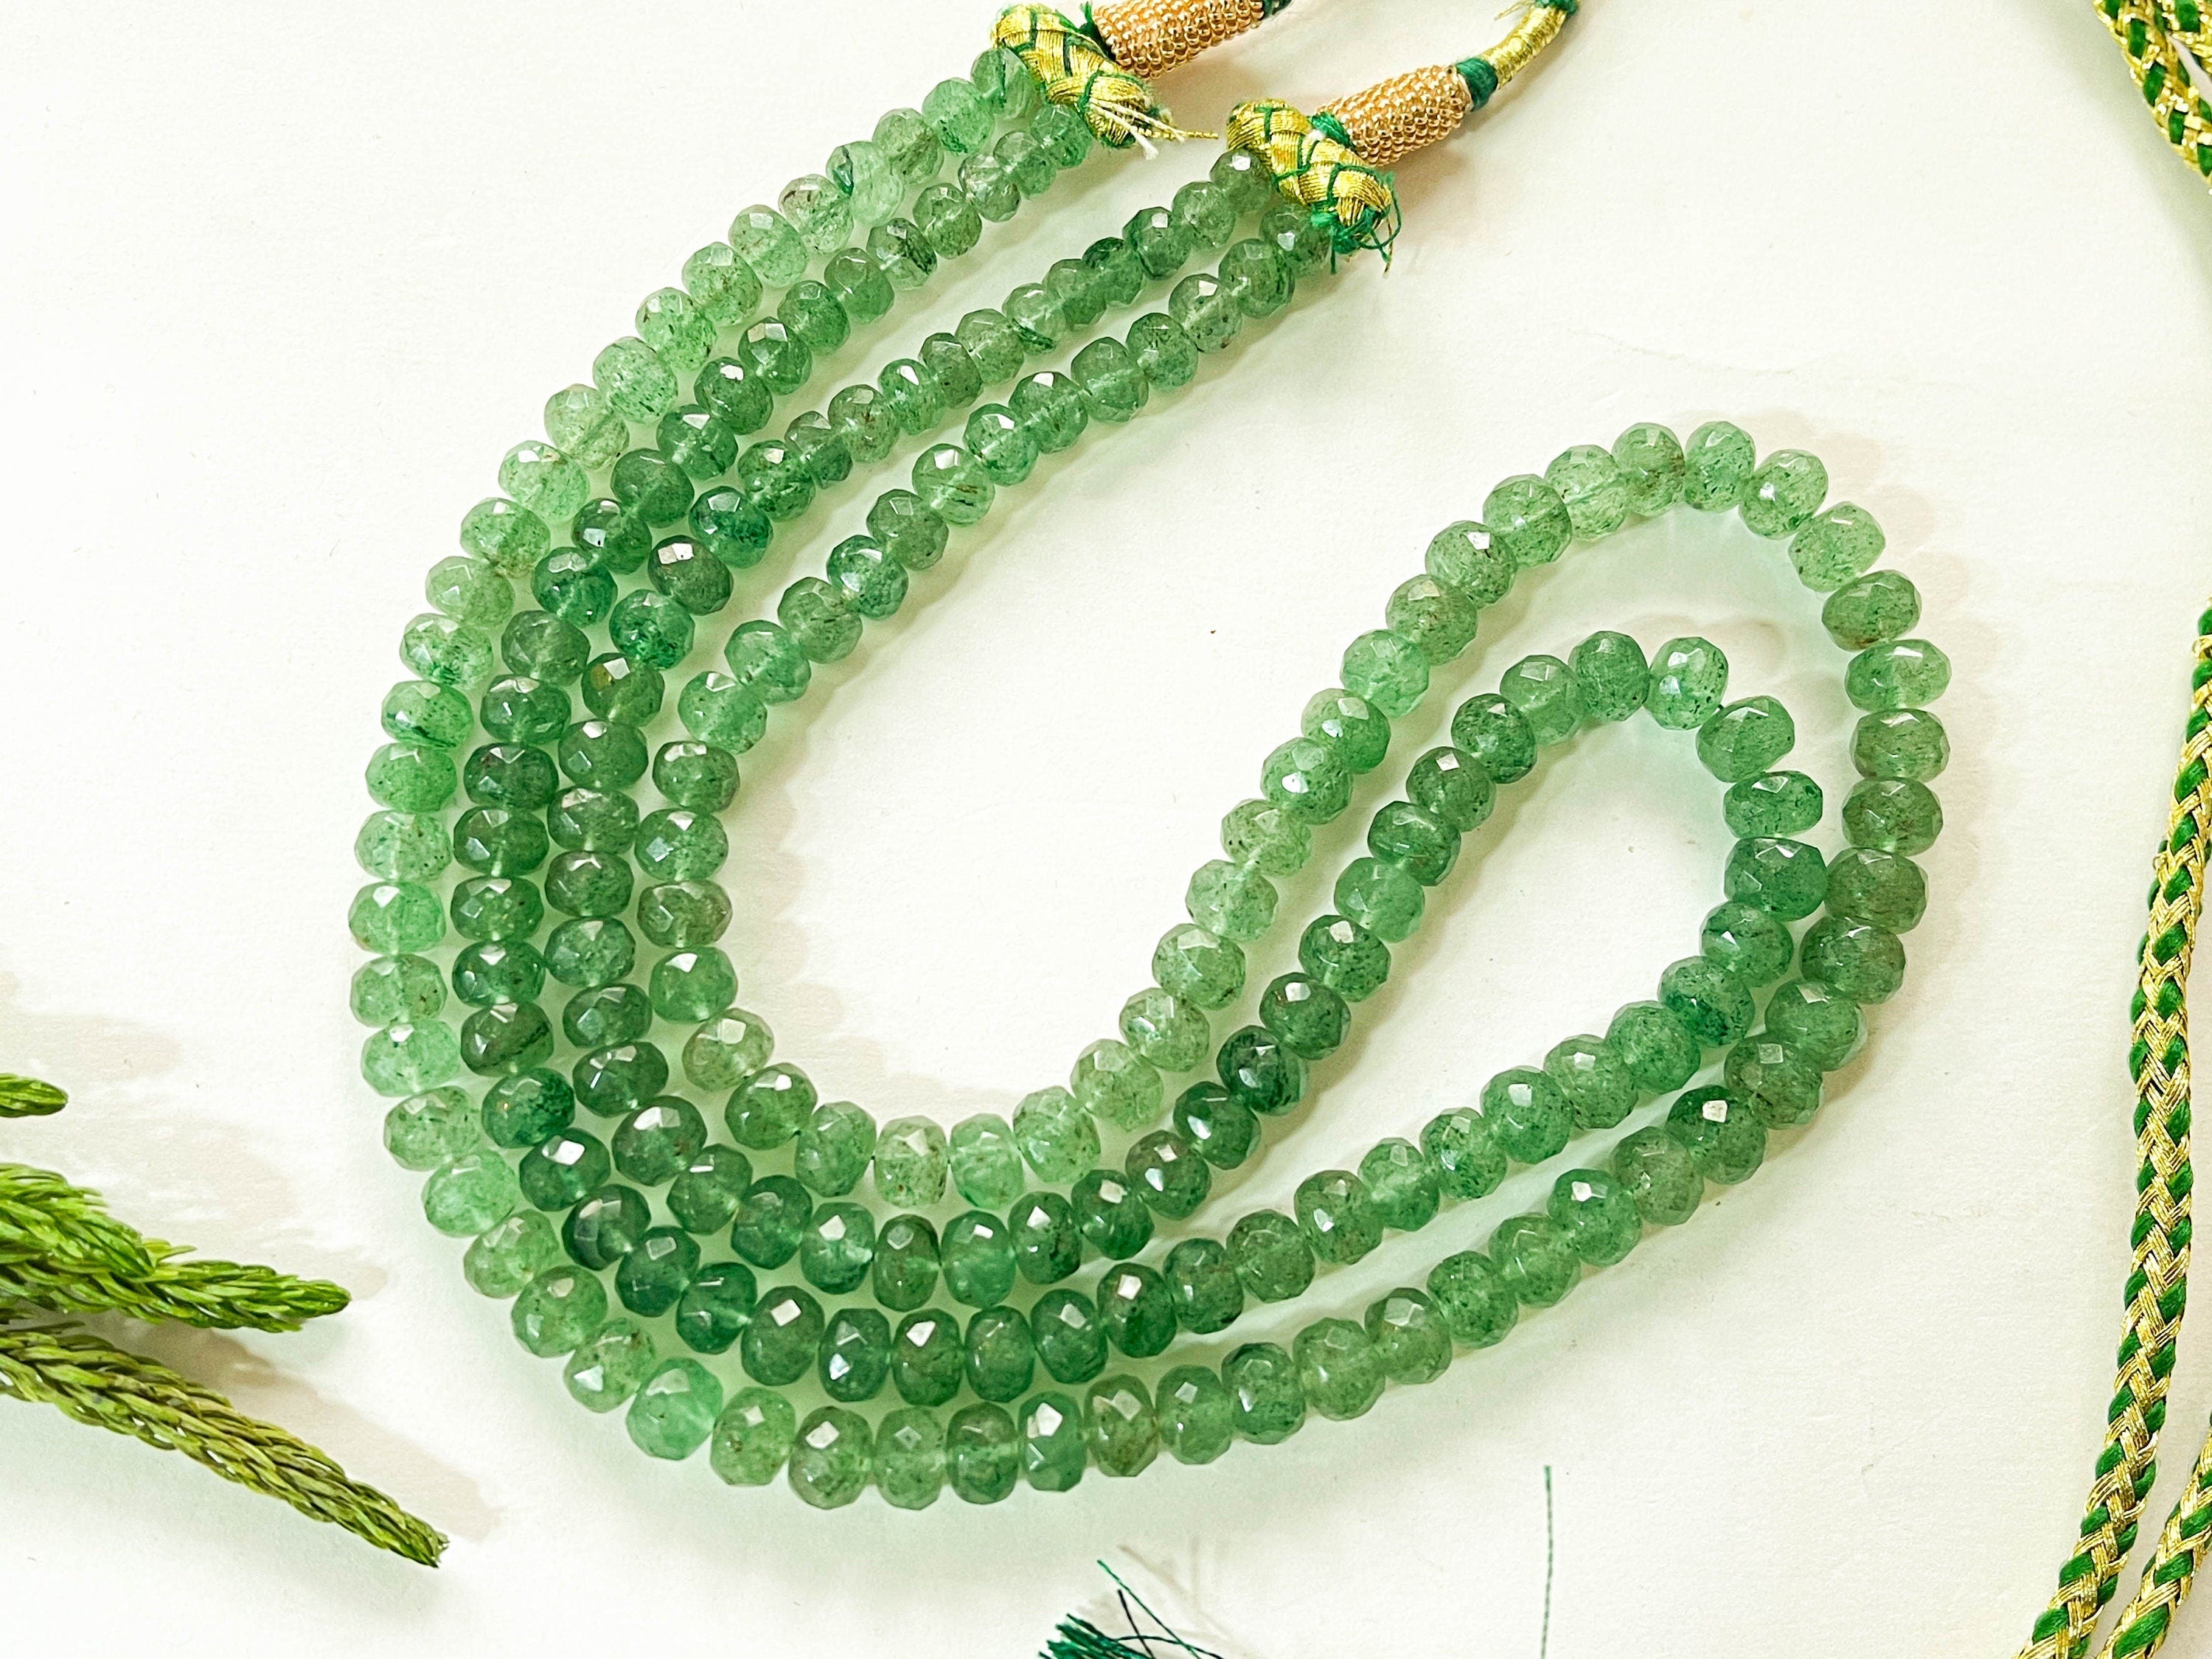 AAA Green Aventurine beads Faceted Rondelle shape, 16 Inch String, Natural Aventurine Gemstone for Jewelry, 6mm to 7mm Graduation Beadsforyourjewelry